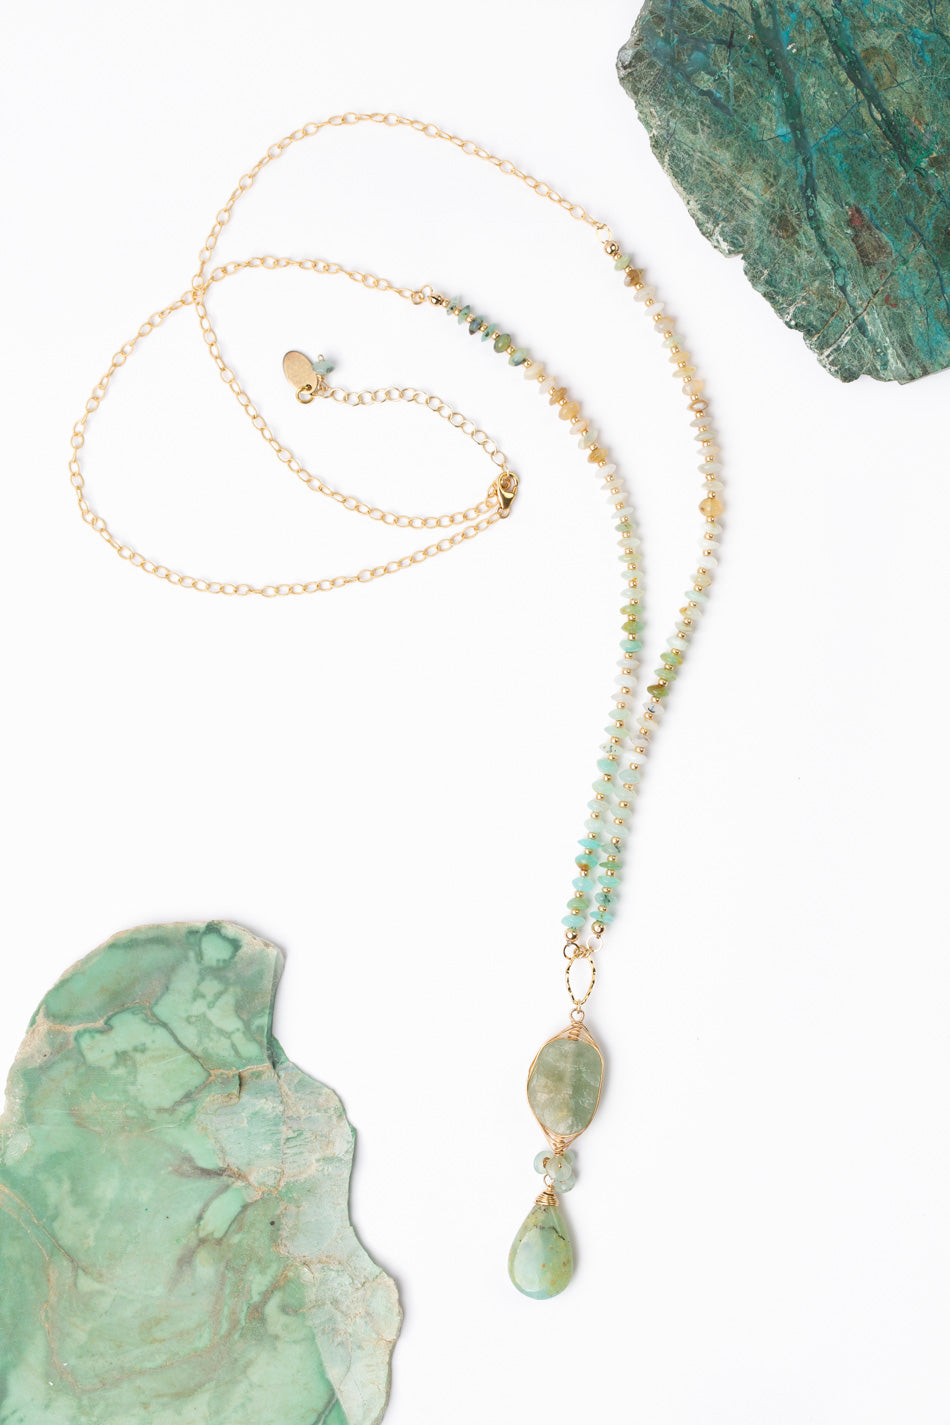 One Of A Kind 30-32" Opalina, Aquamarine with Peruvian Opal Statement Necklace